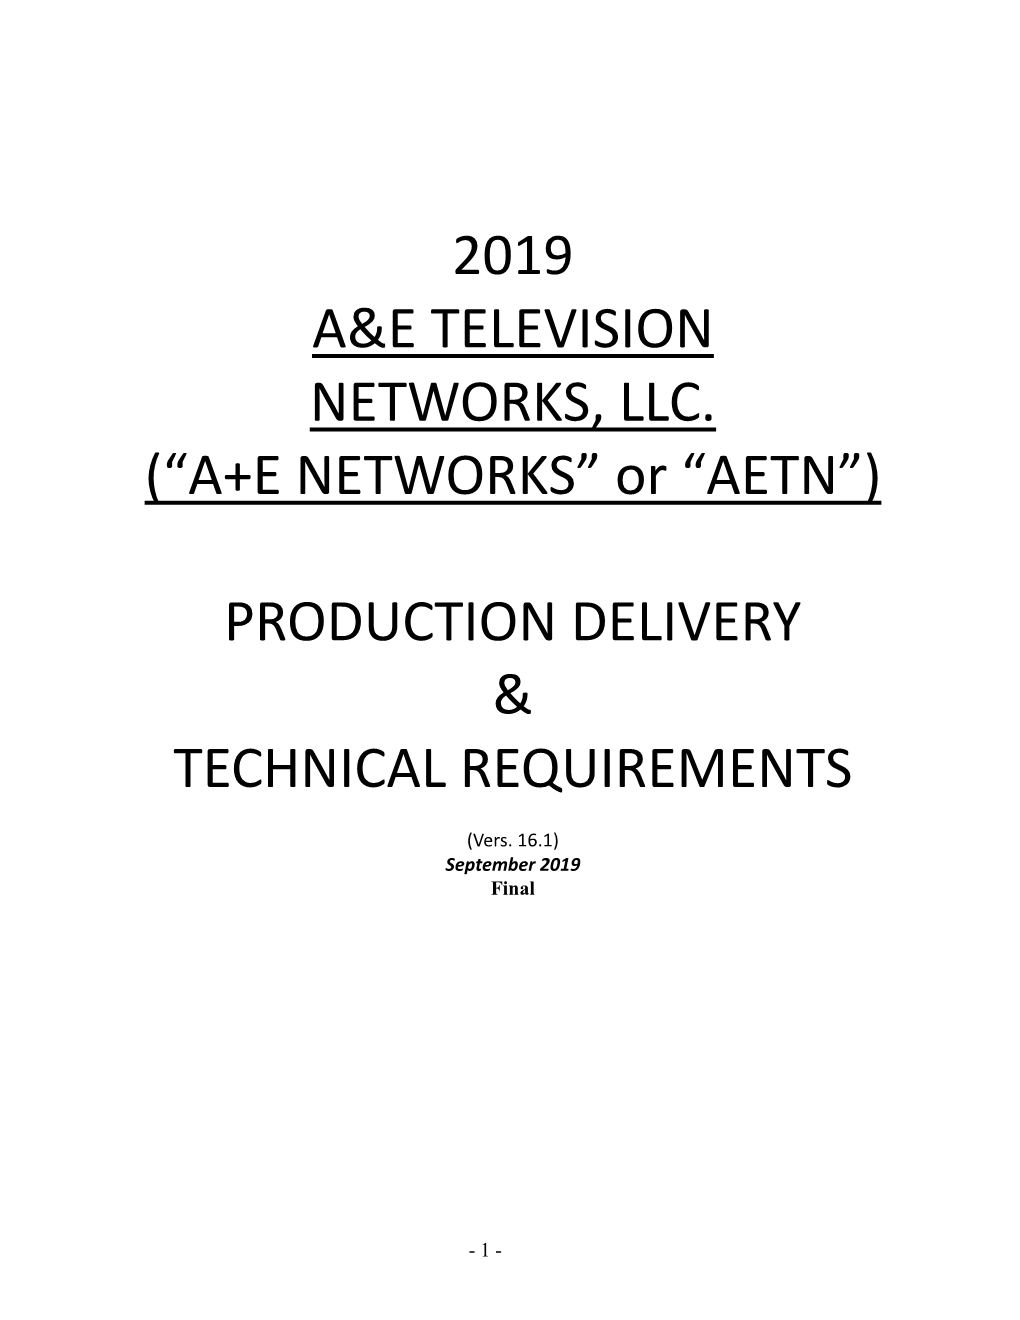 2019 A&E TELEVISION NETWORKS, LLC. (“A+E NETWORKS” Or “AETN”) PRODUCTION DELIVERY & TECHNICAL REQUIREMENTS